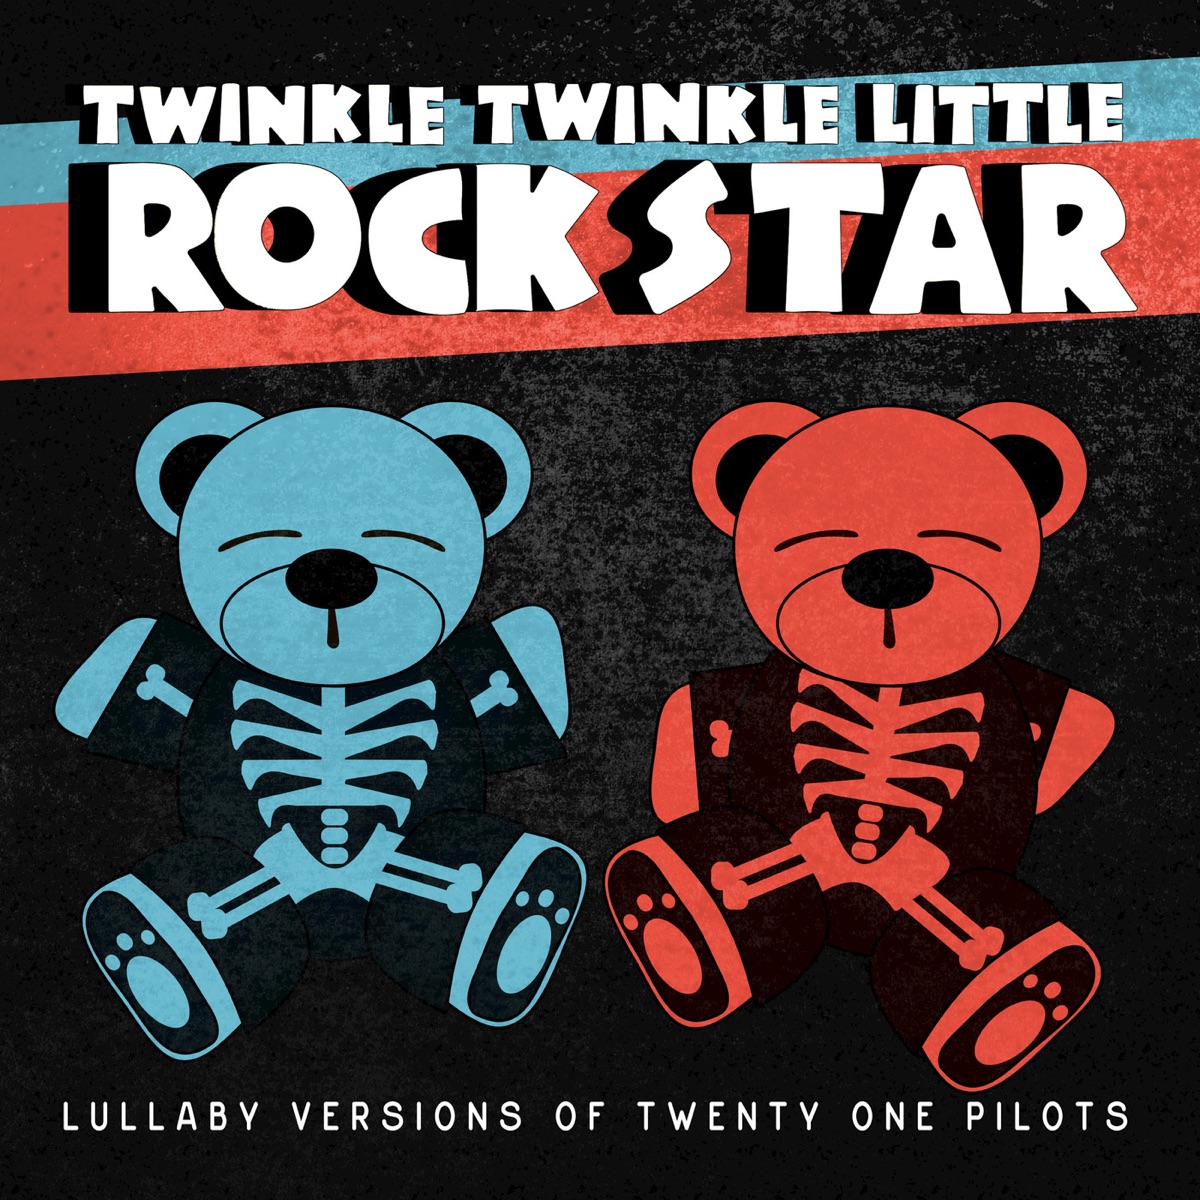 Lullaby Versions of Twenty One Pilots Album Cover by Twinkle Twinkle ...